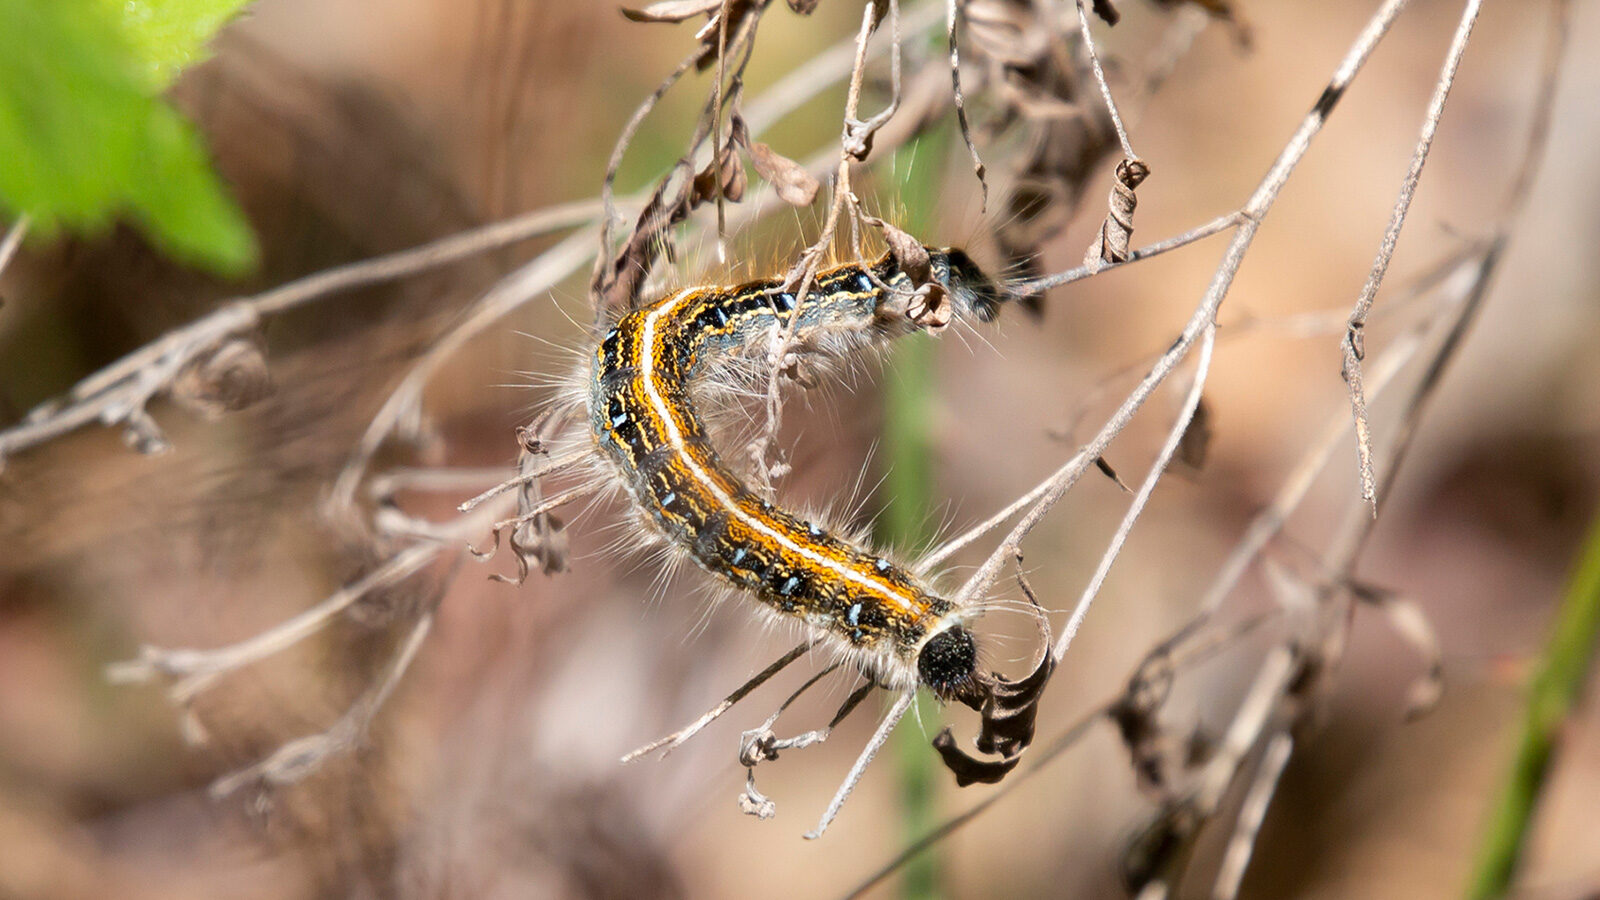 Eastern tent caterpillar crawling on a twig